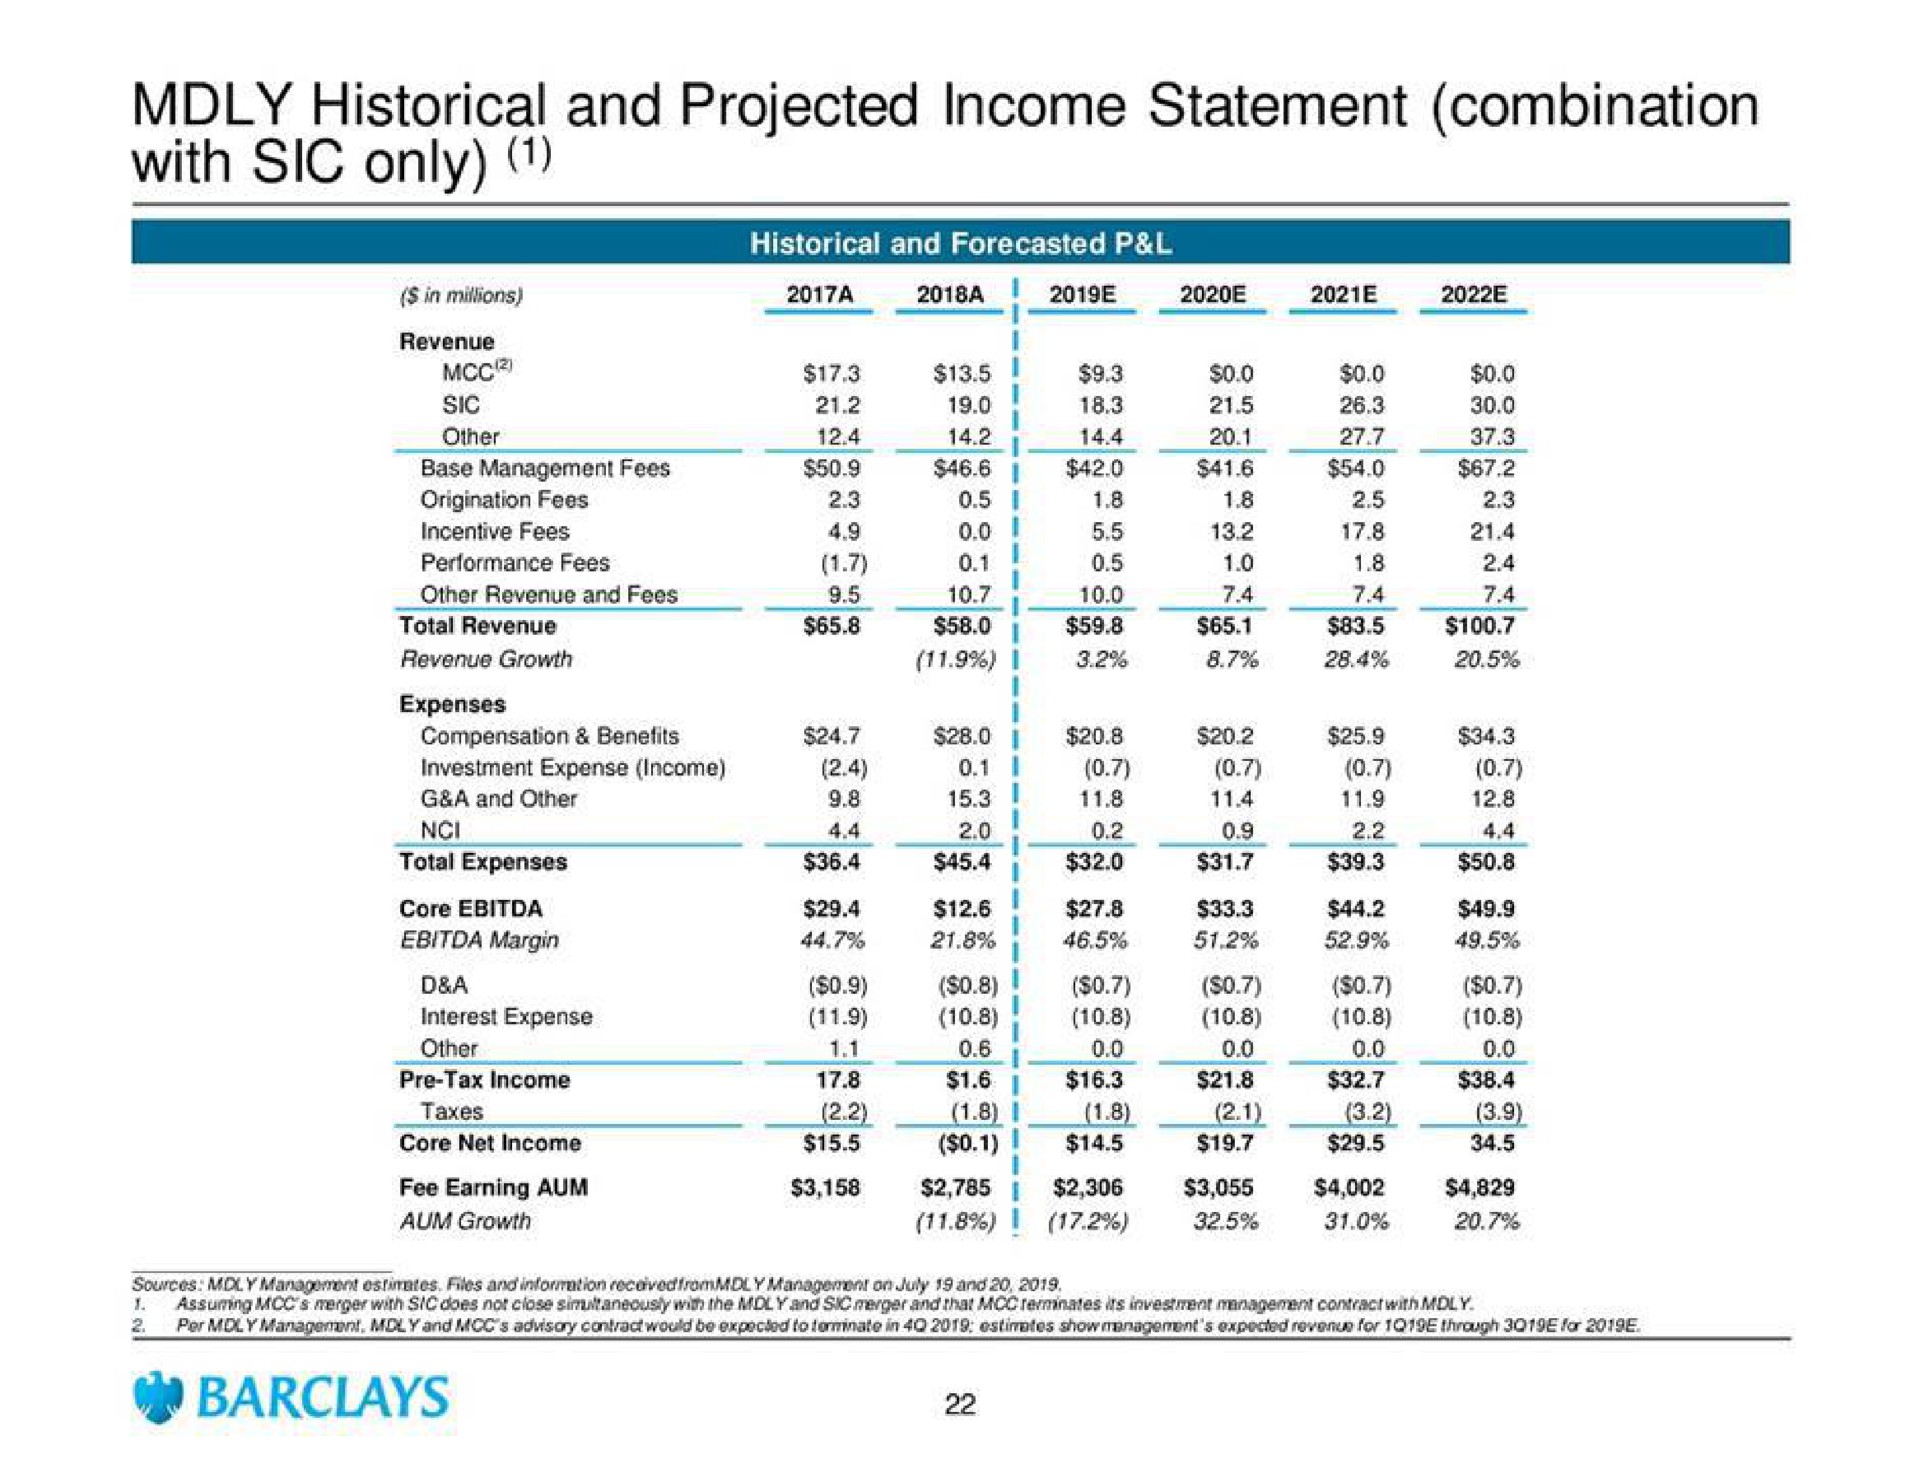 historical and projected income statement combination with sic only | Barclays